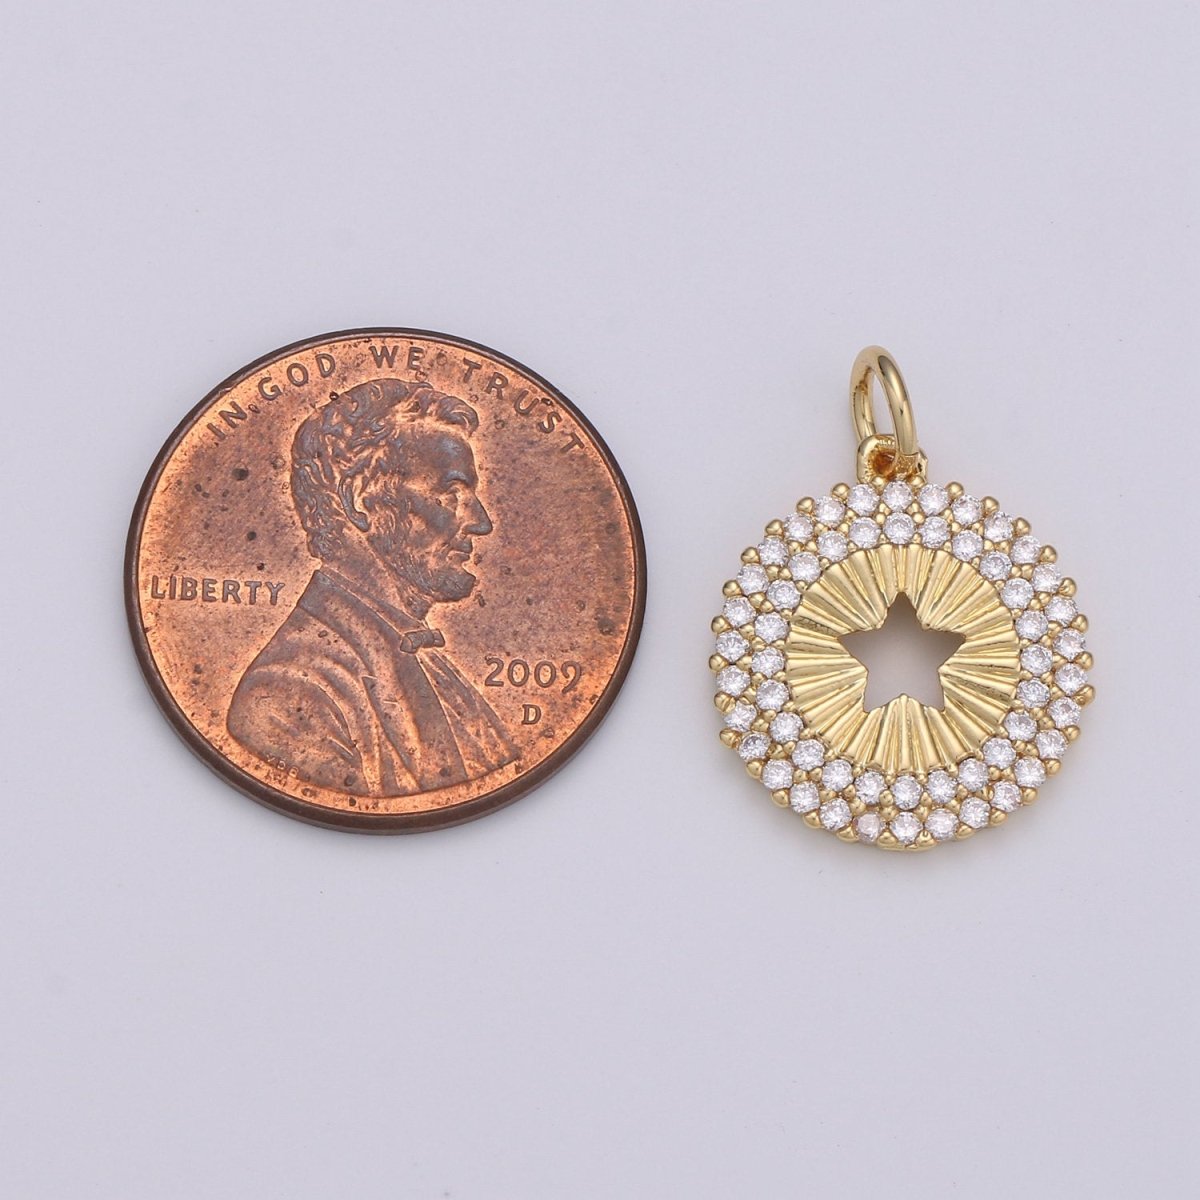 14mm 24K Gold and Silver Round Star Charm - Round Star Charm, Micro Pave Star Charm, Twinkle Star Charm, 24k Gold Filled Charm D-576 D-577 - DLUXCA